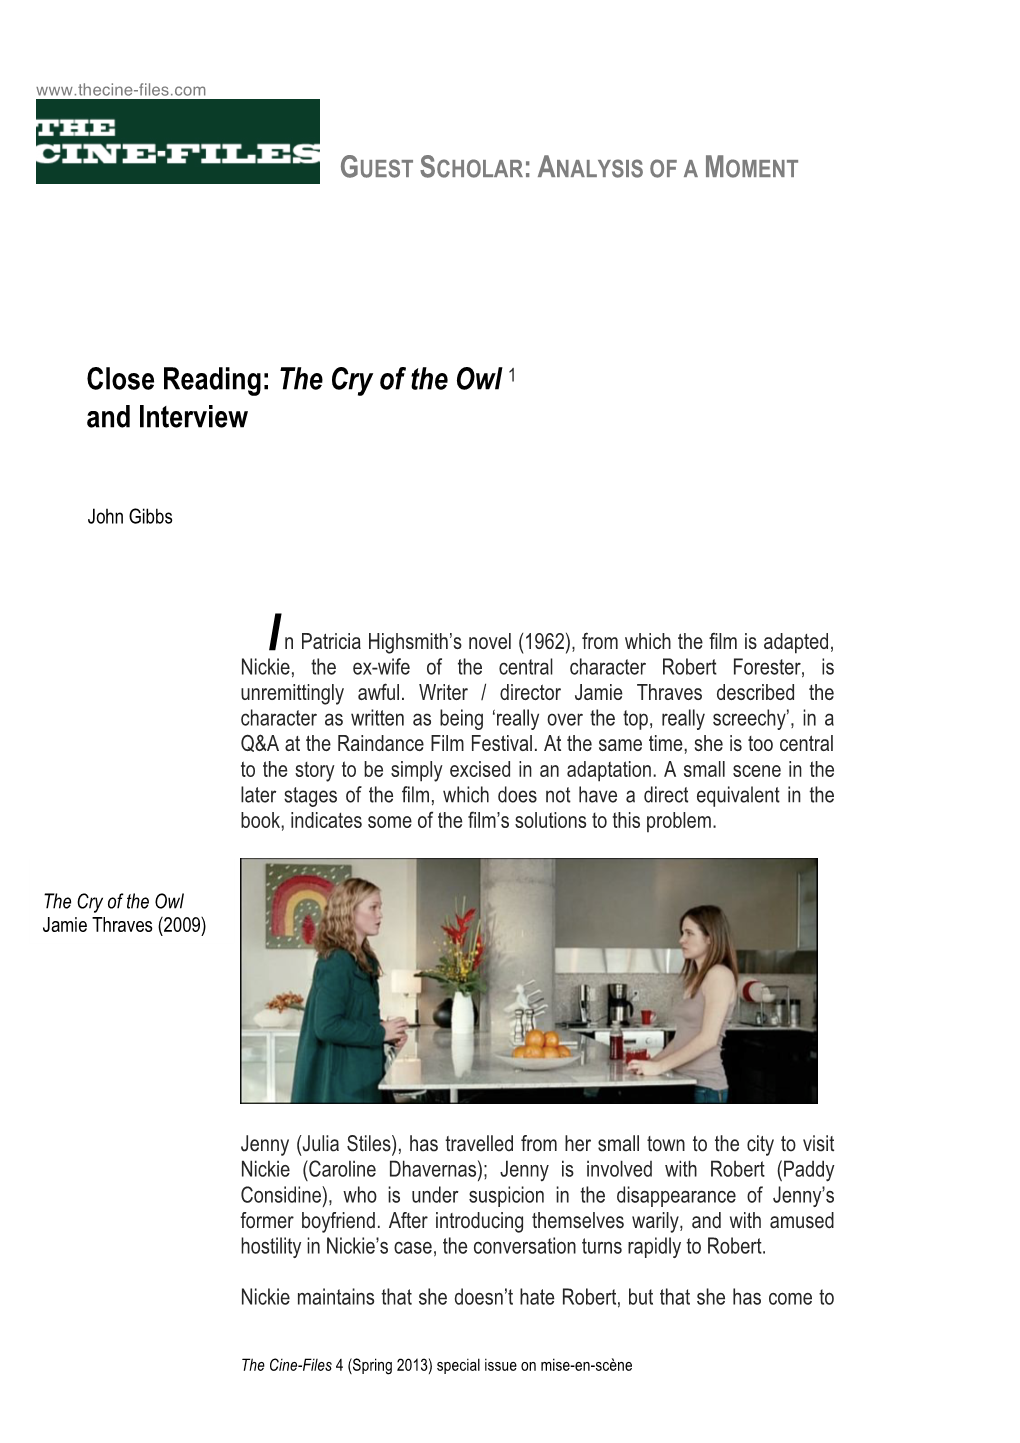 Close Reading: the Cry of the Owl and Interview